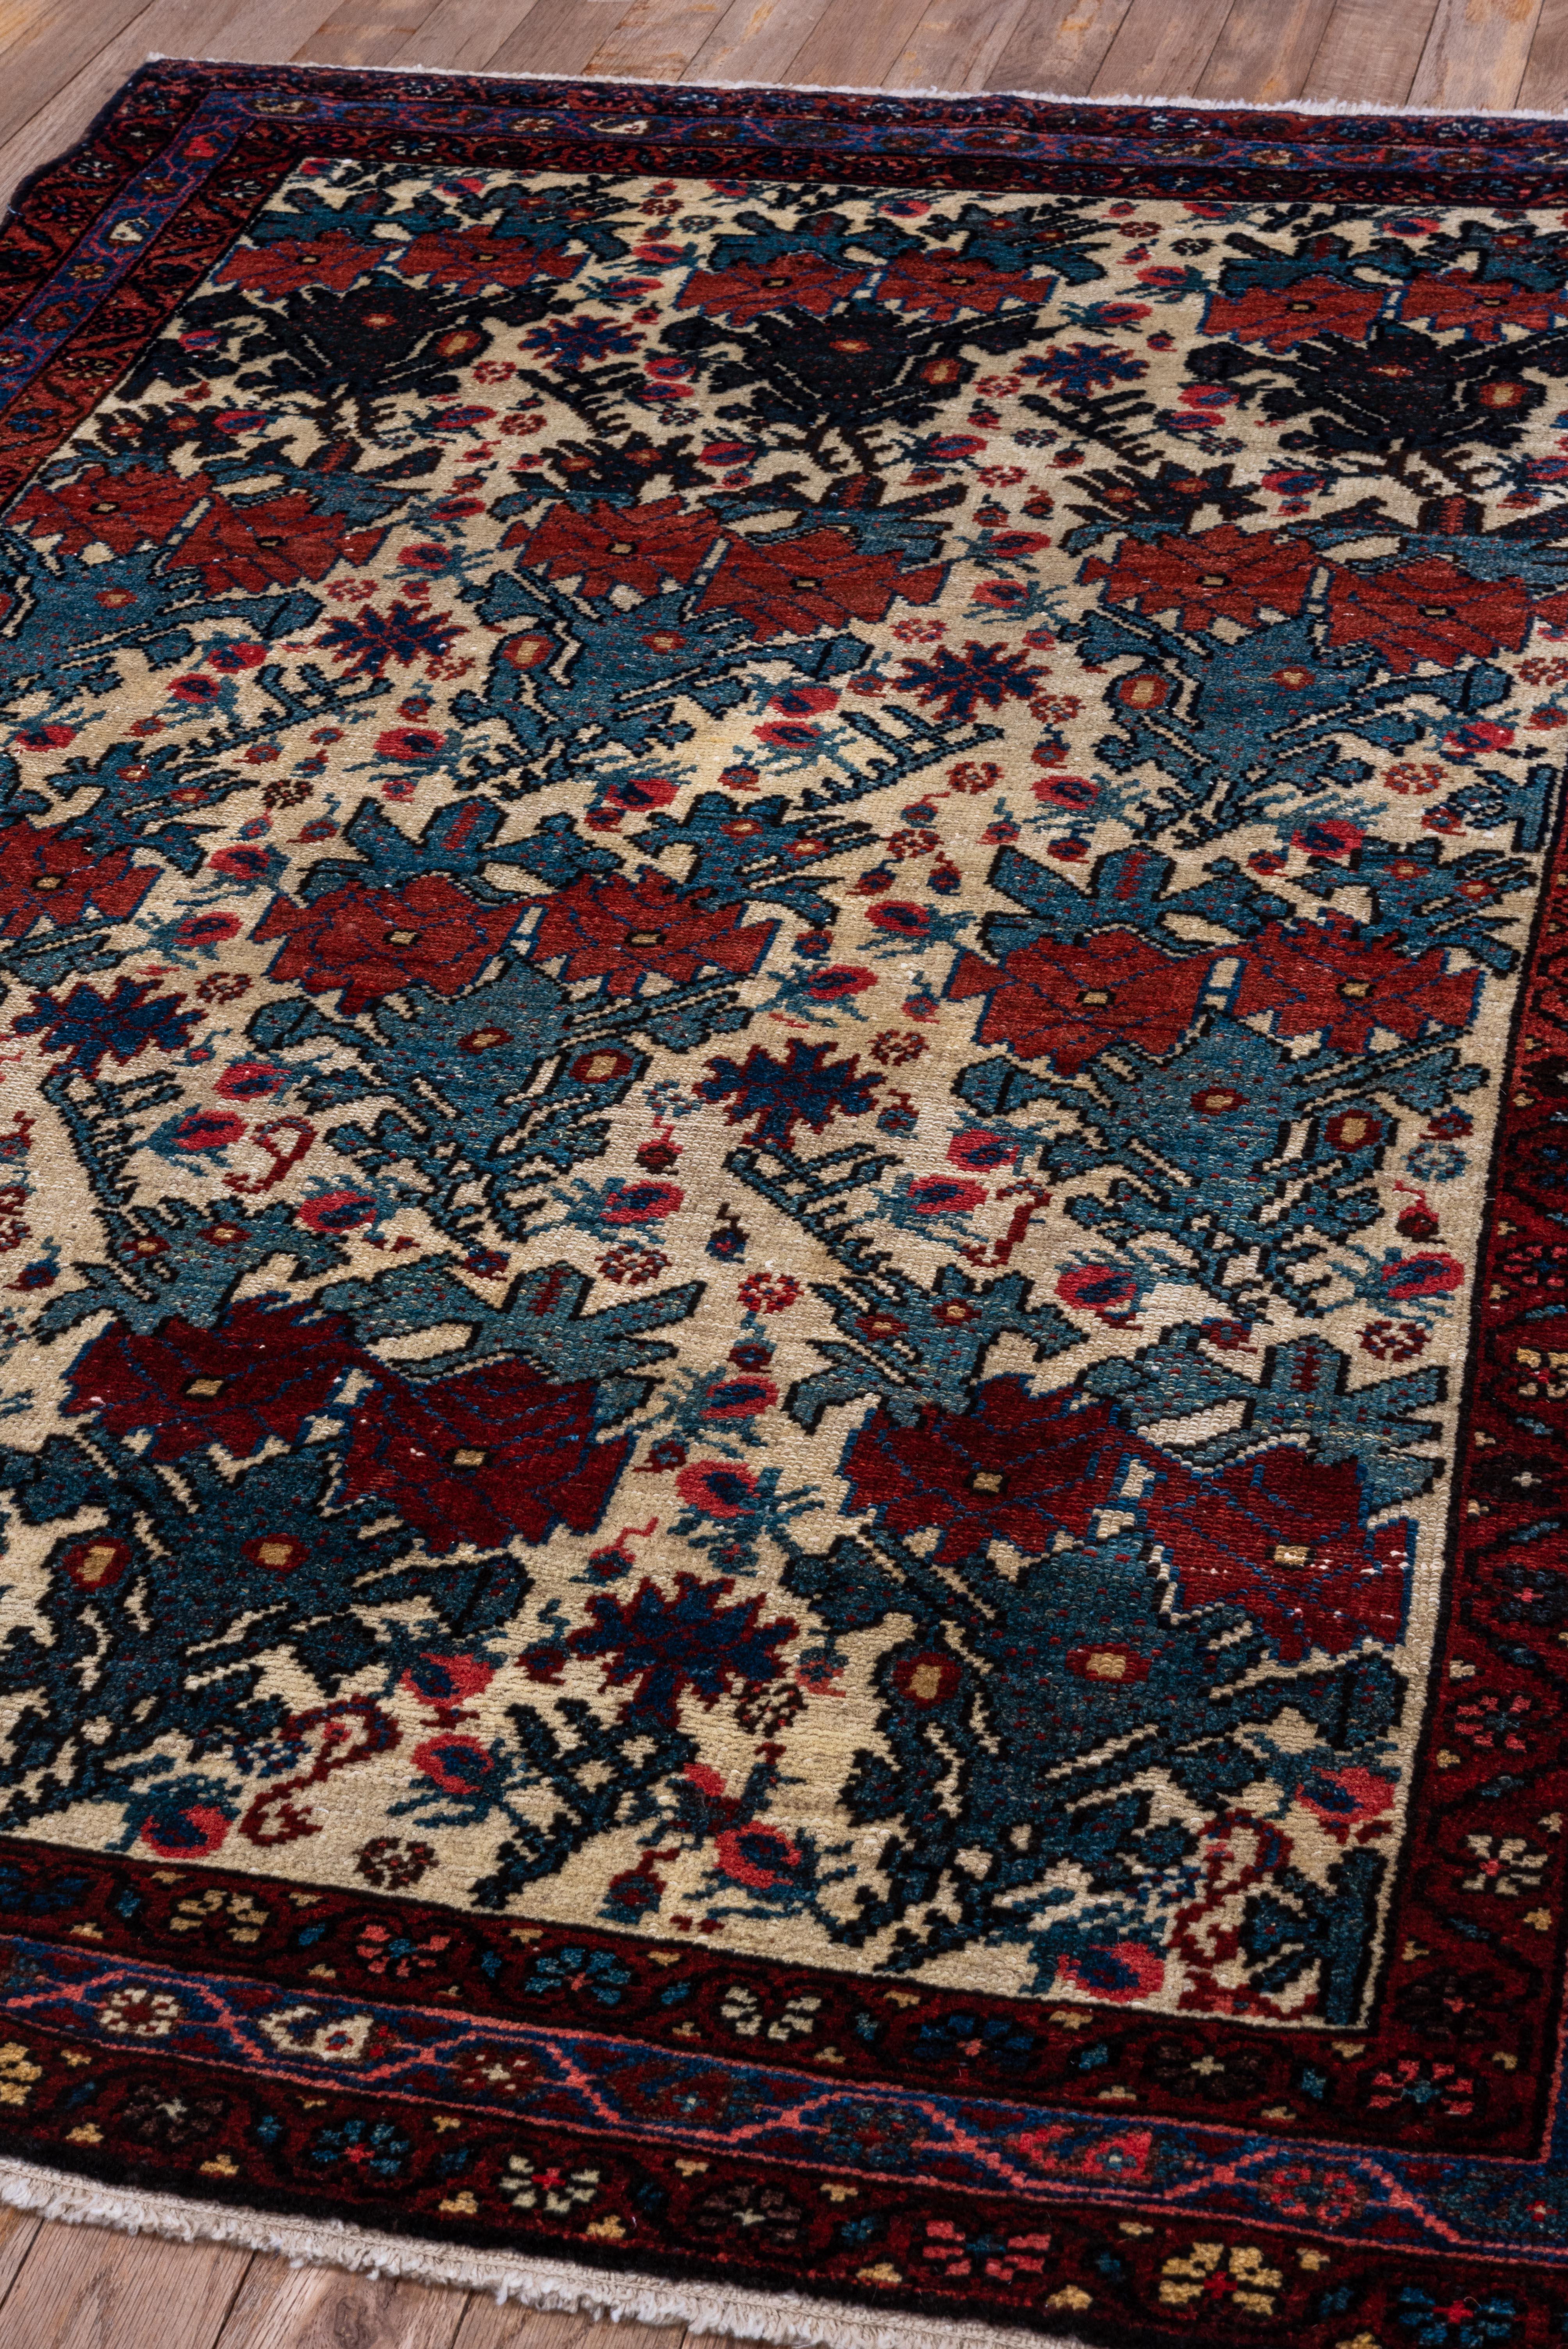 12 Rose Florets Across Center Field - Malayer Rug - Antique 1940 For Sale 3